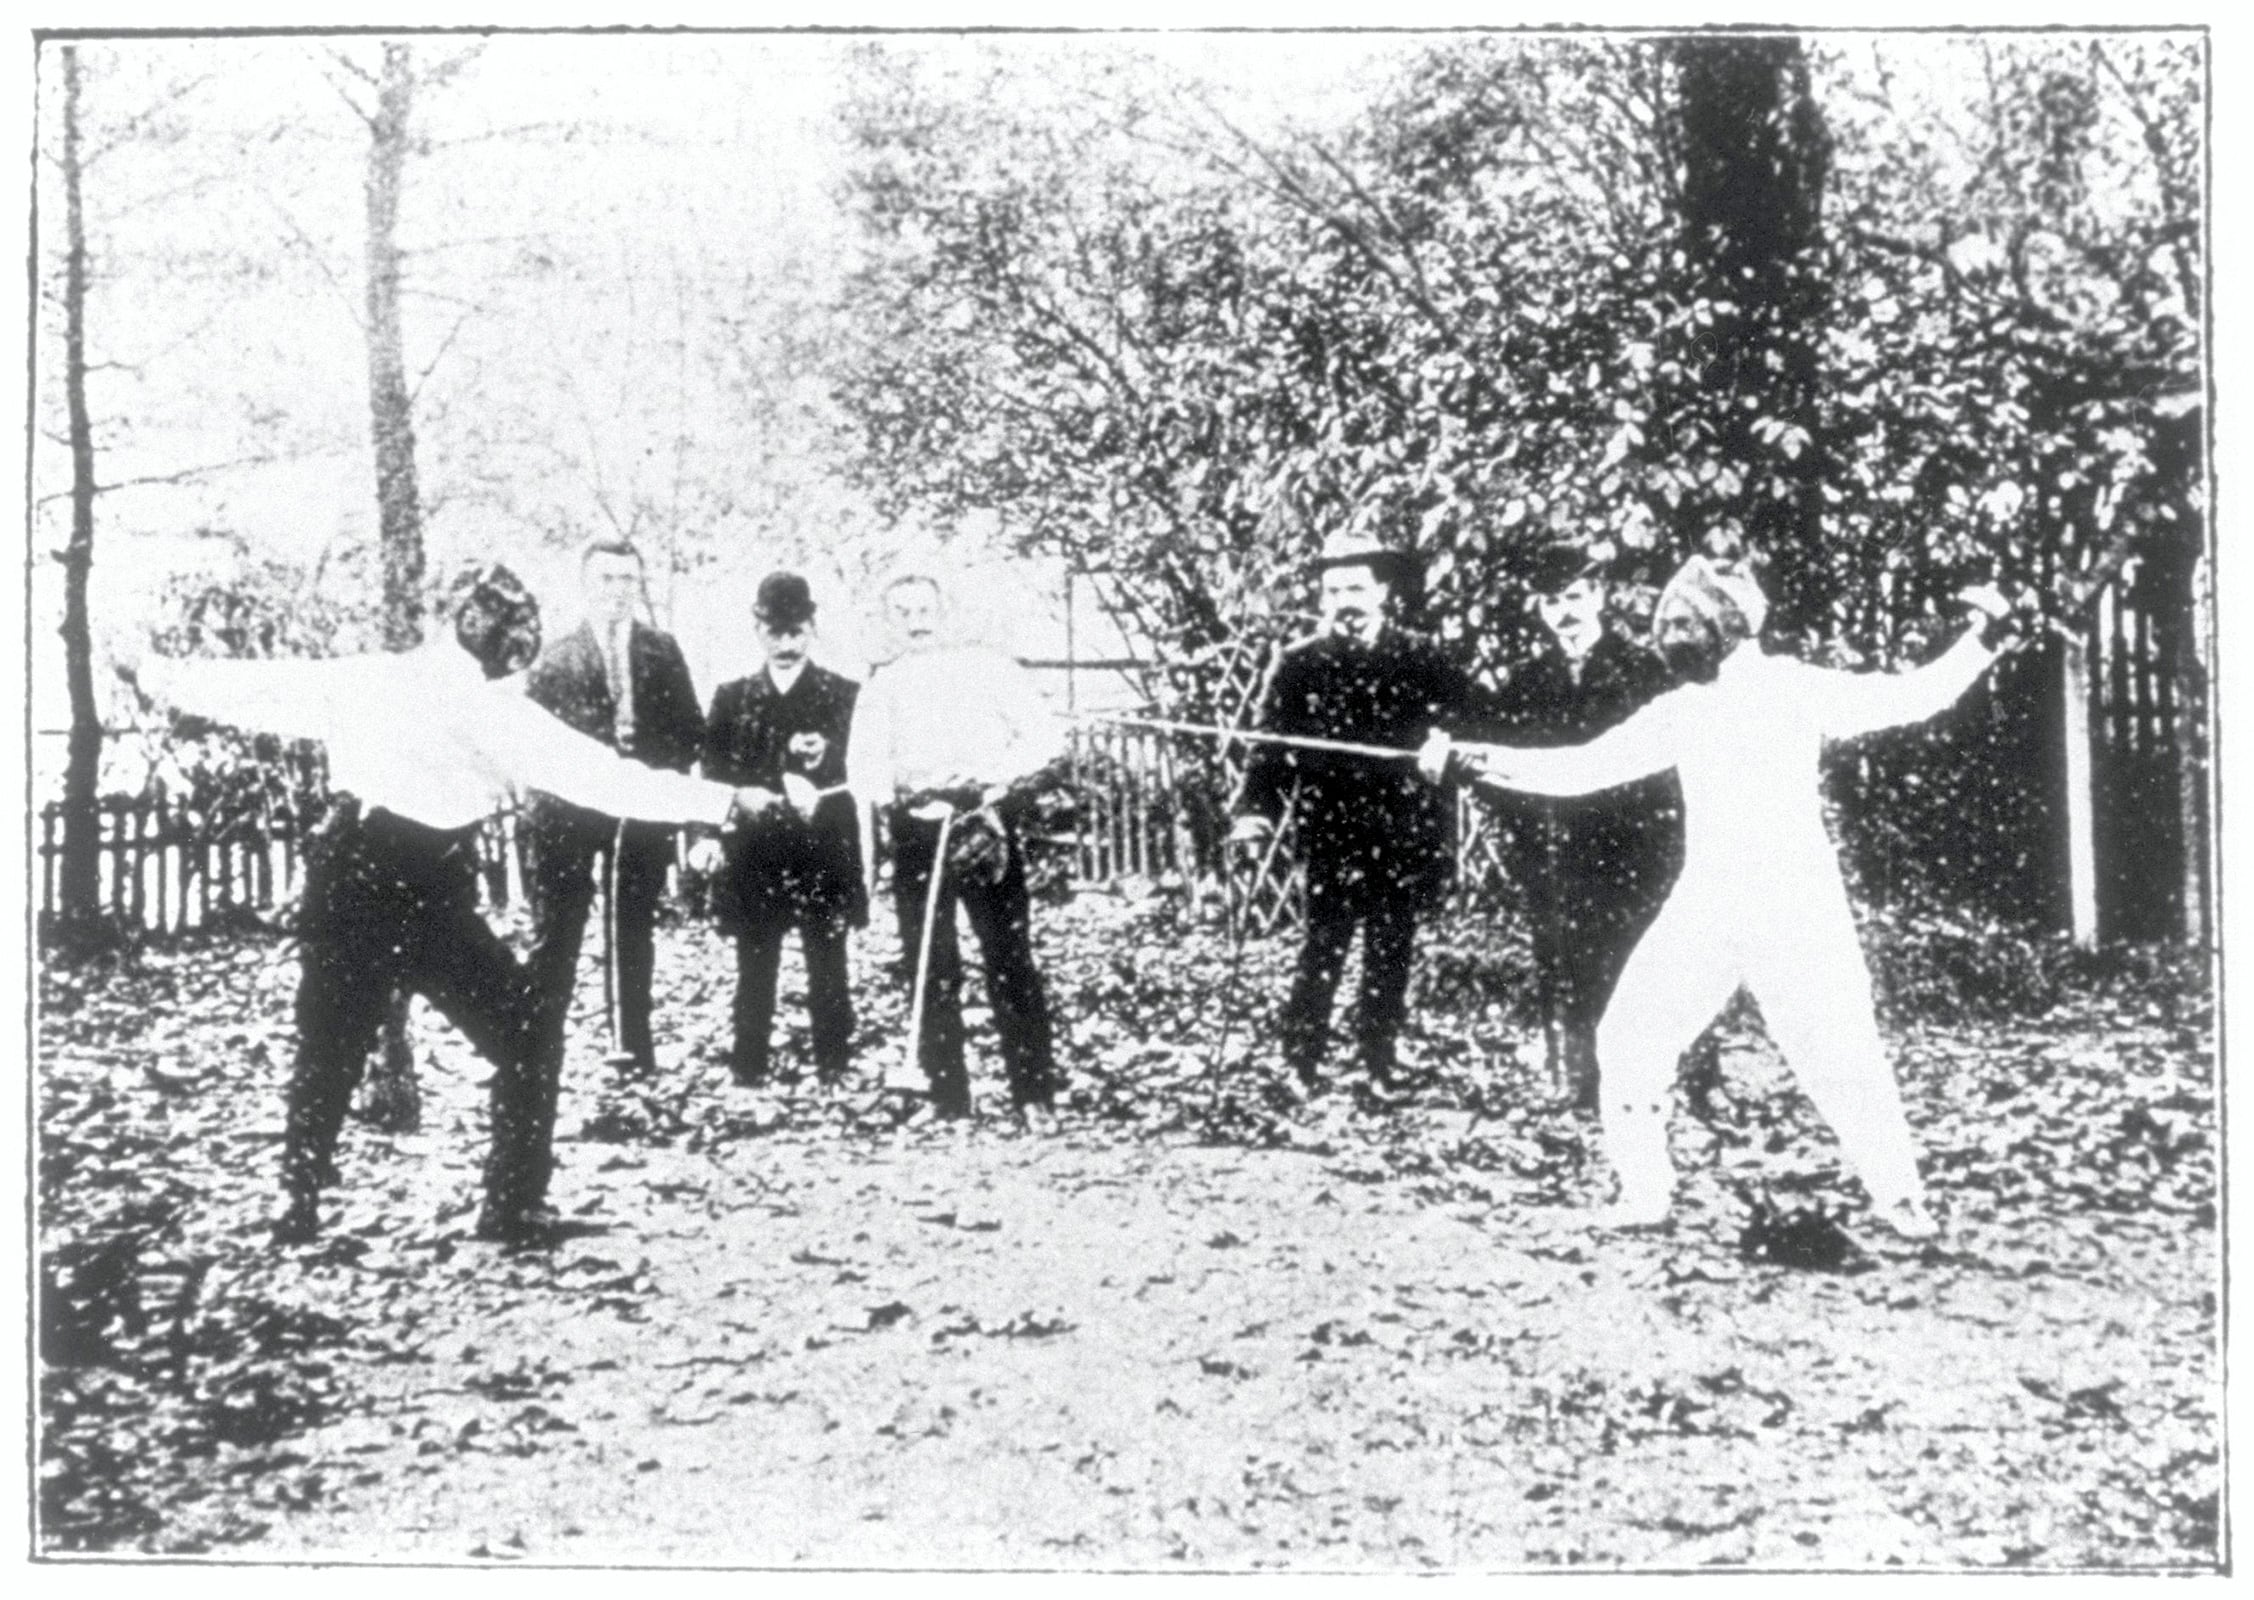  Baron Pierre de COUBERTIN against Mr. VIENNE at the School of Utilitarian Sports. Pr DUBOIS in the middle.